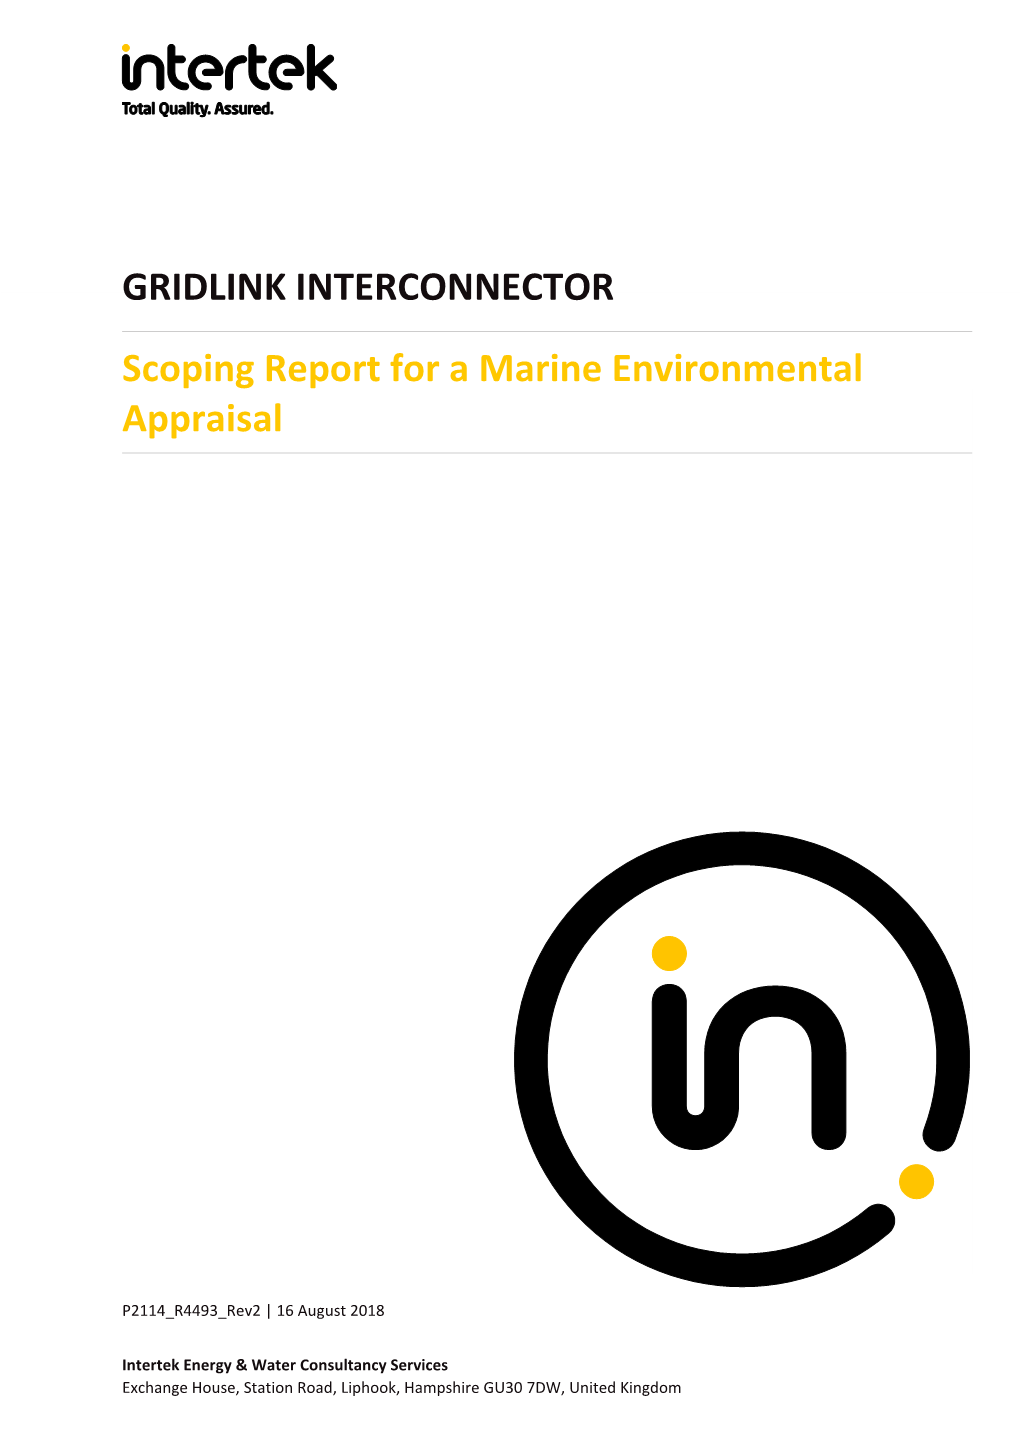 GRIDLINK INTERCONNECTOR Scoping Report for a Marine Environmental Appraisal